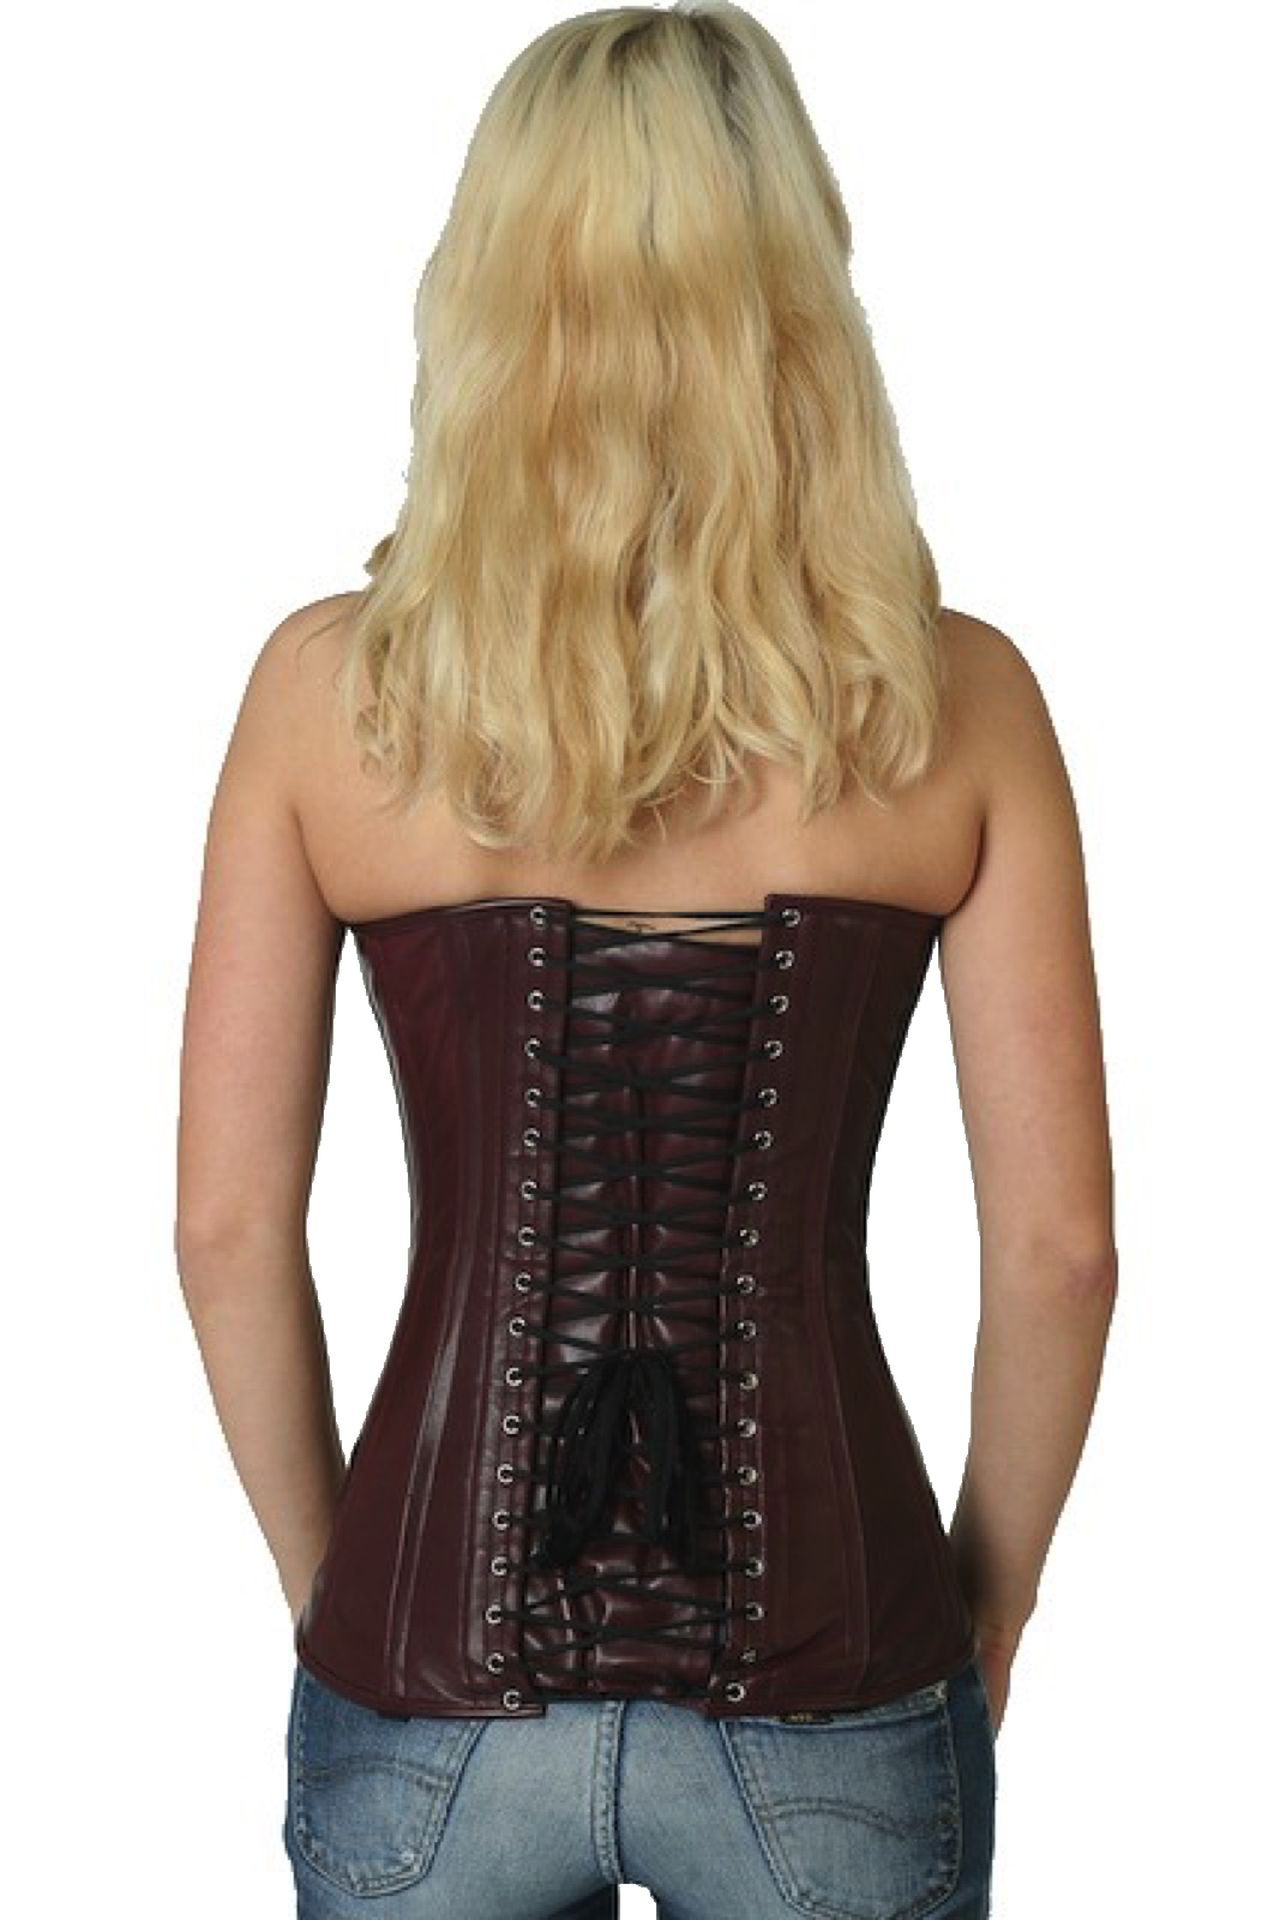 Corset red burgundy leather overbust ly24